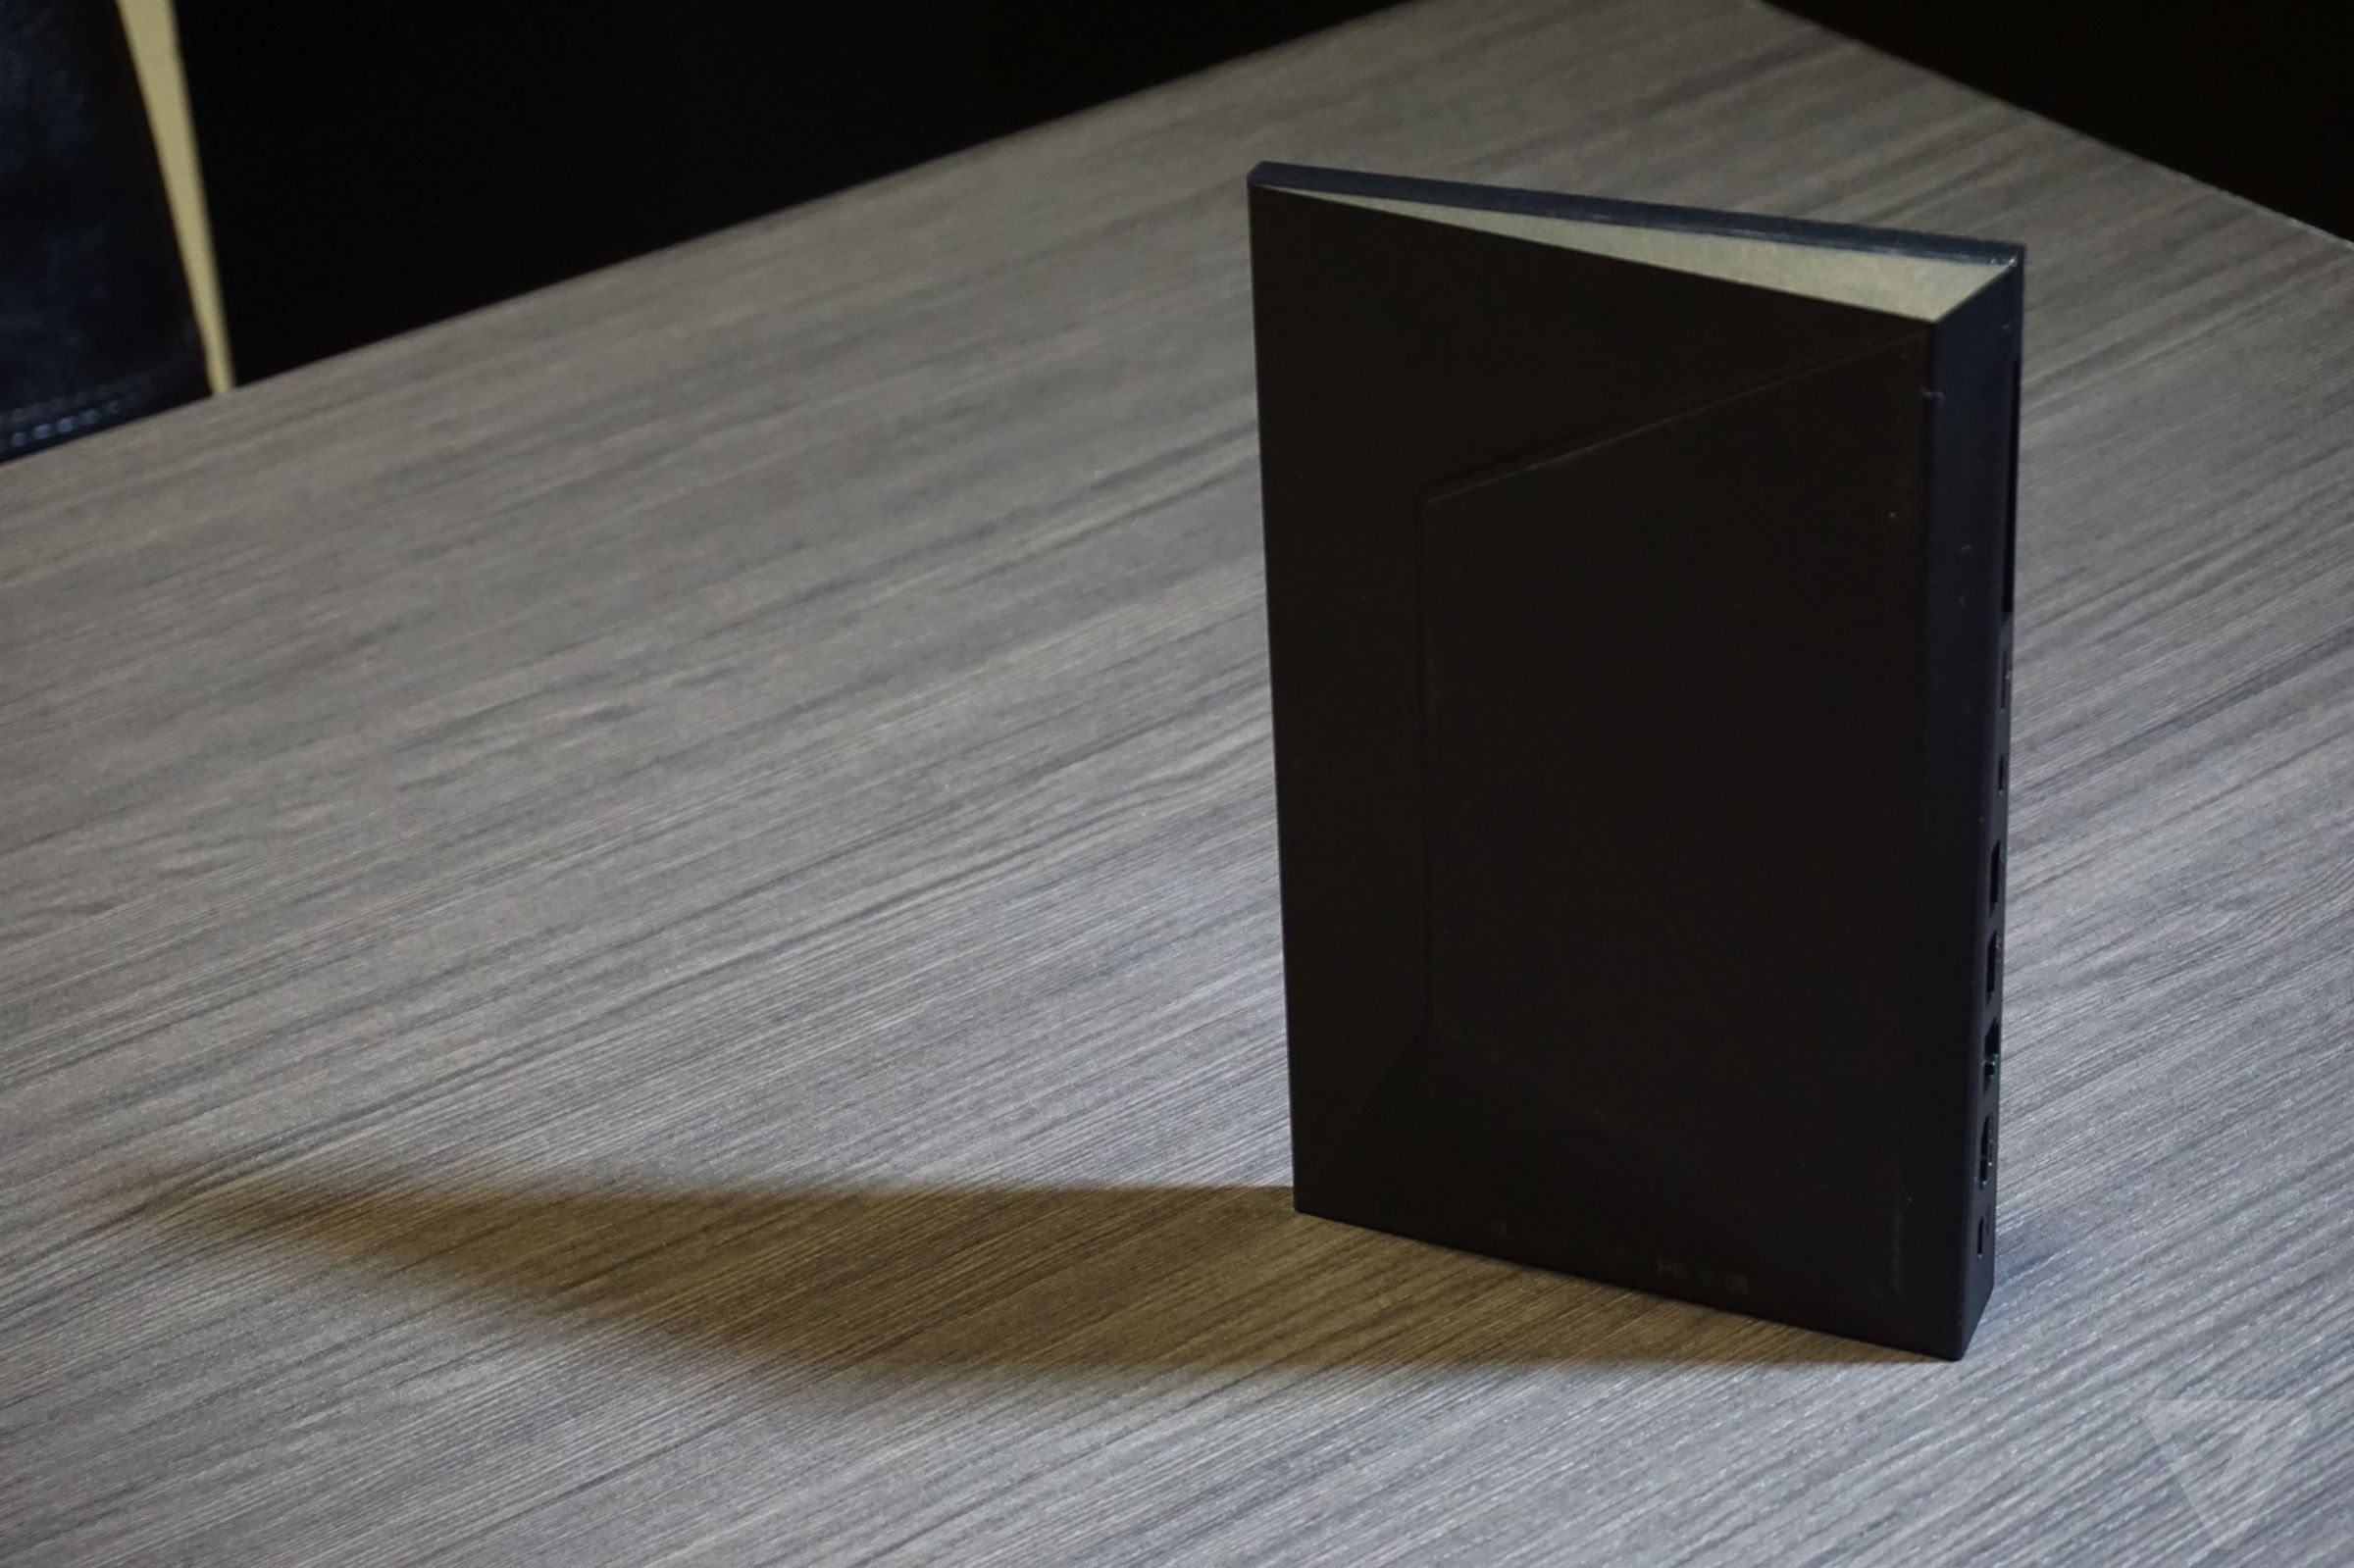 Nvidia Shield console hands-on